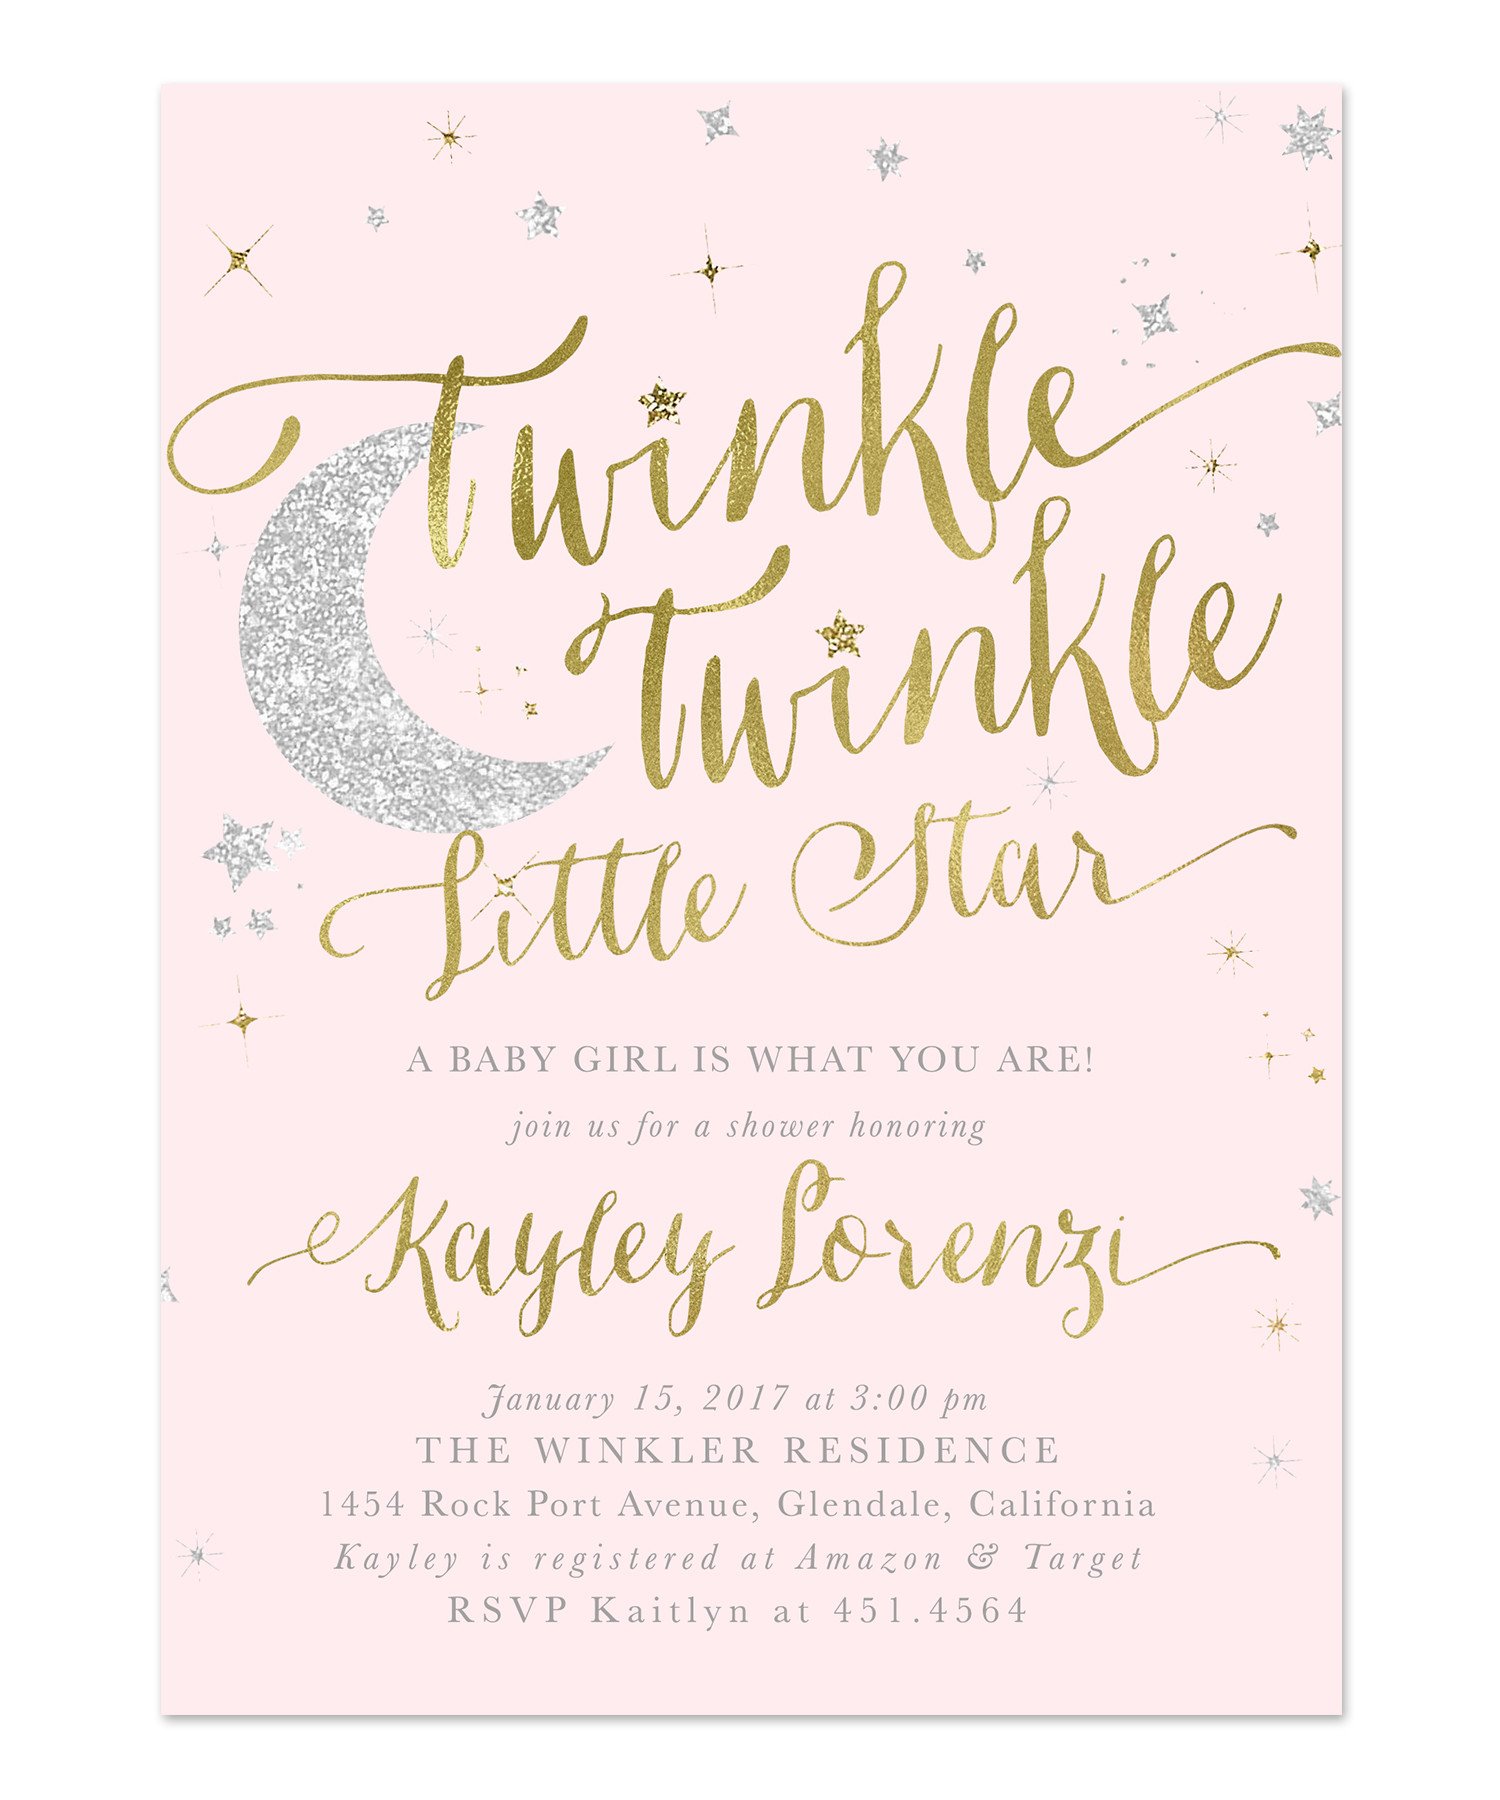 Full Size of Baby Shower:cheap Invitations Baby Shower Pinterest Baby Shower Ideas For Girls Baby Girl Themed Showers Pinterest Nursery Ideas Baby Girl Themes Baby Girl Themes For Bedroom Ideas For Girl Baby Showers Elegant Baby Shower